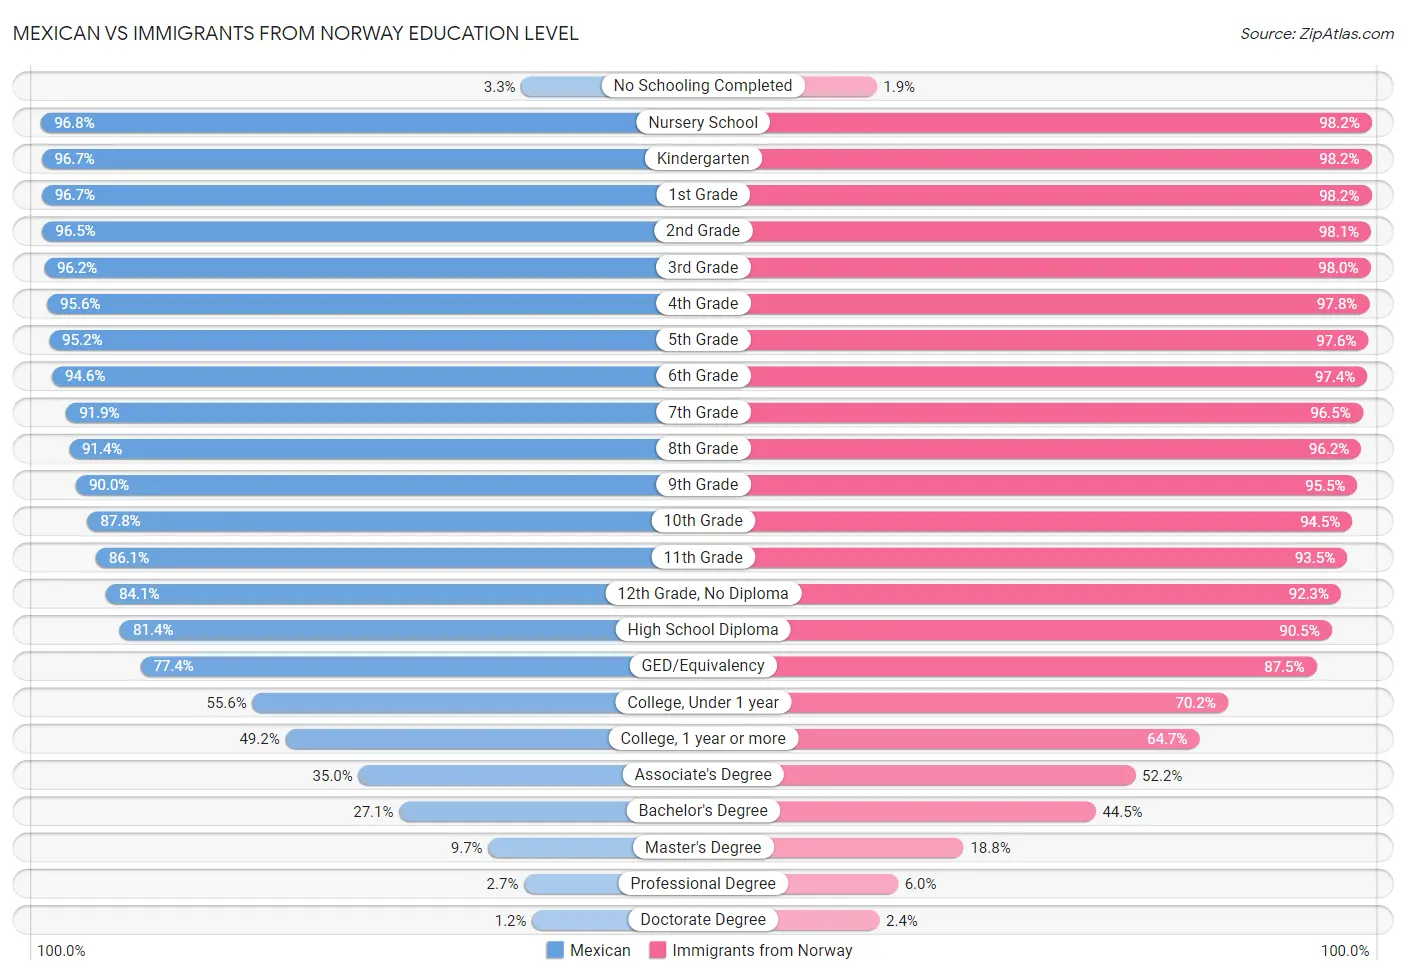 Mexican vs Immigrants from Norway Education Level